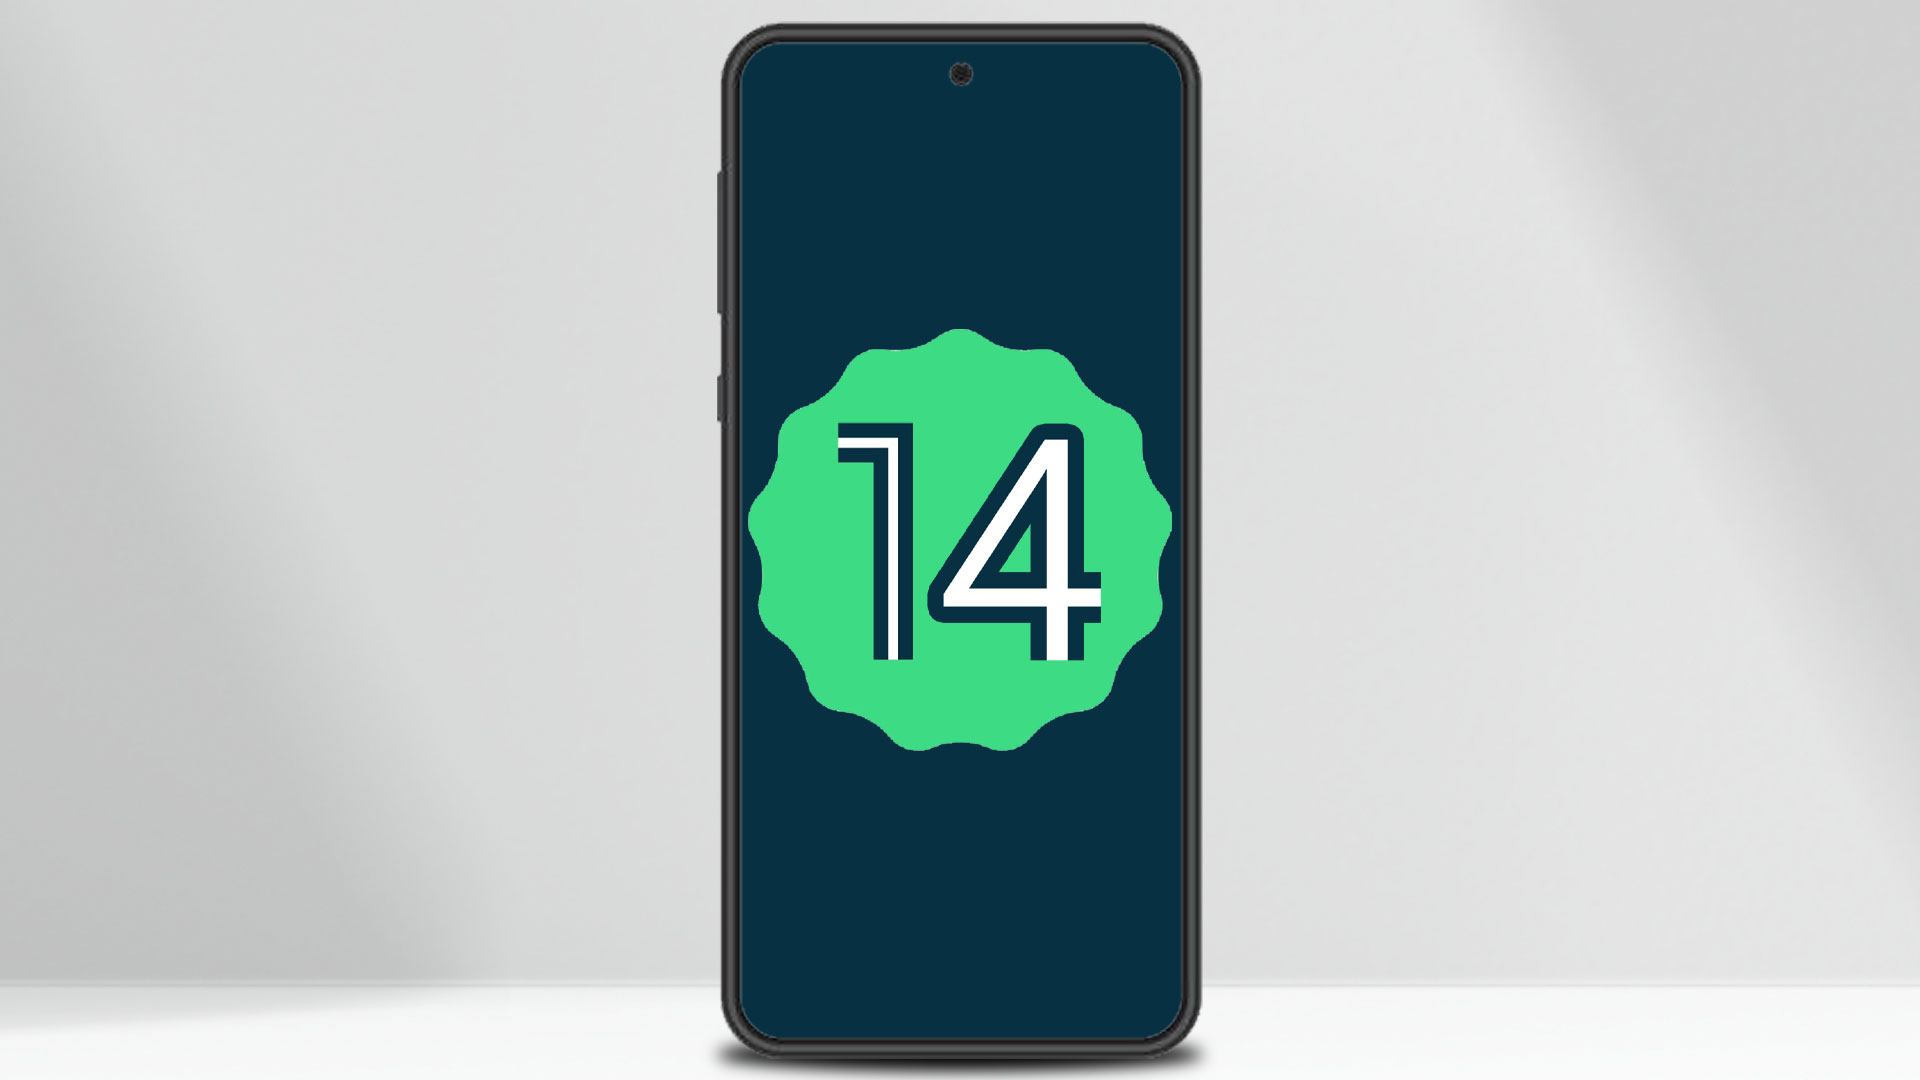 android-14-logo-in-android-phone